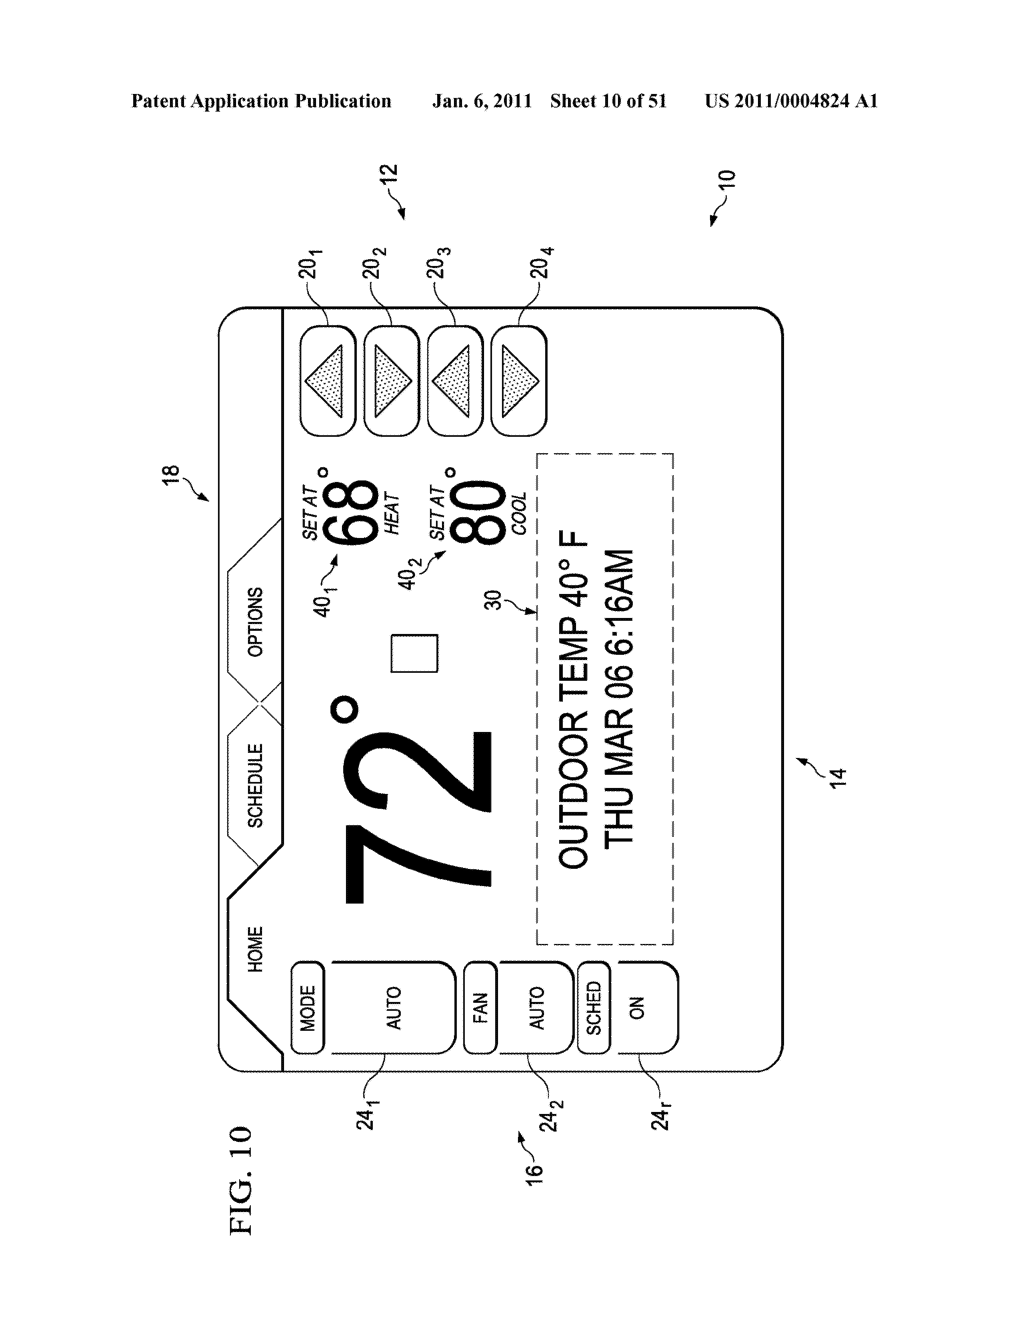 DISPLAY APPARATUS AND METHOD HAVING TEXTUAL SYSTEM STATUS MESSAGE DISPLAY CAPABILITY FOR AN ENVIROMENTAL CONTROL SYSTEM - diagram, schematic, and image 11